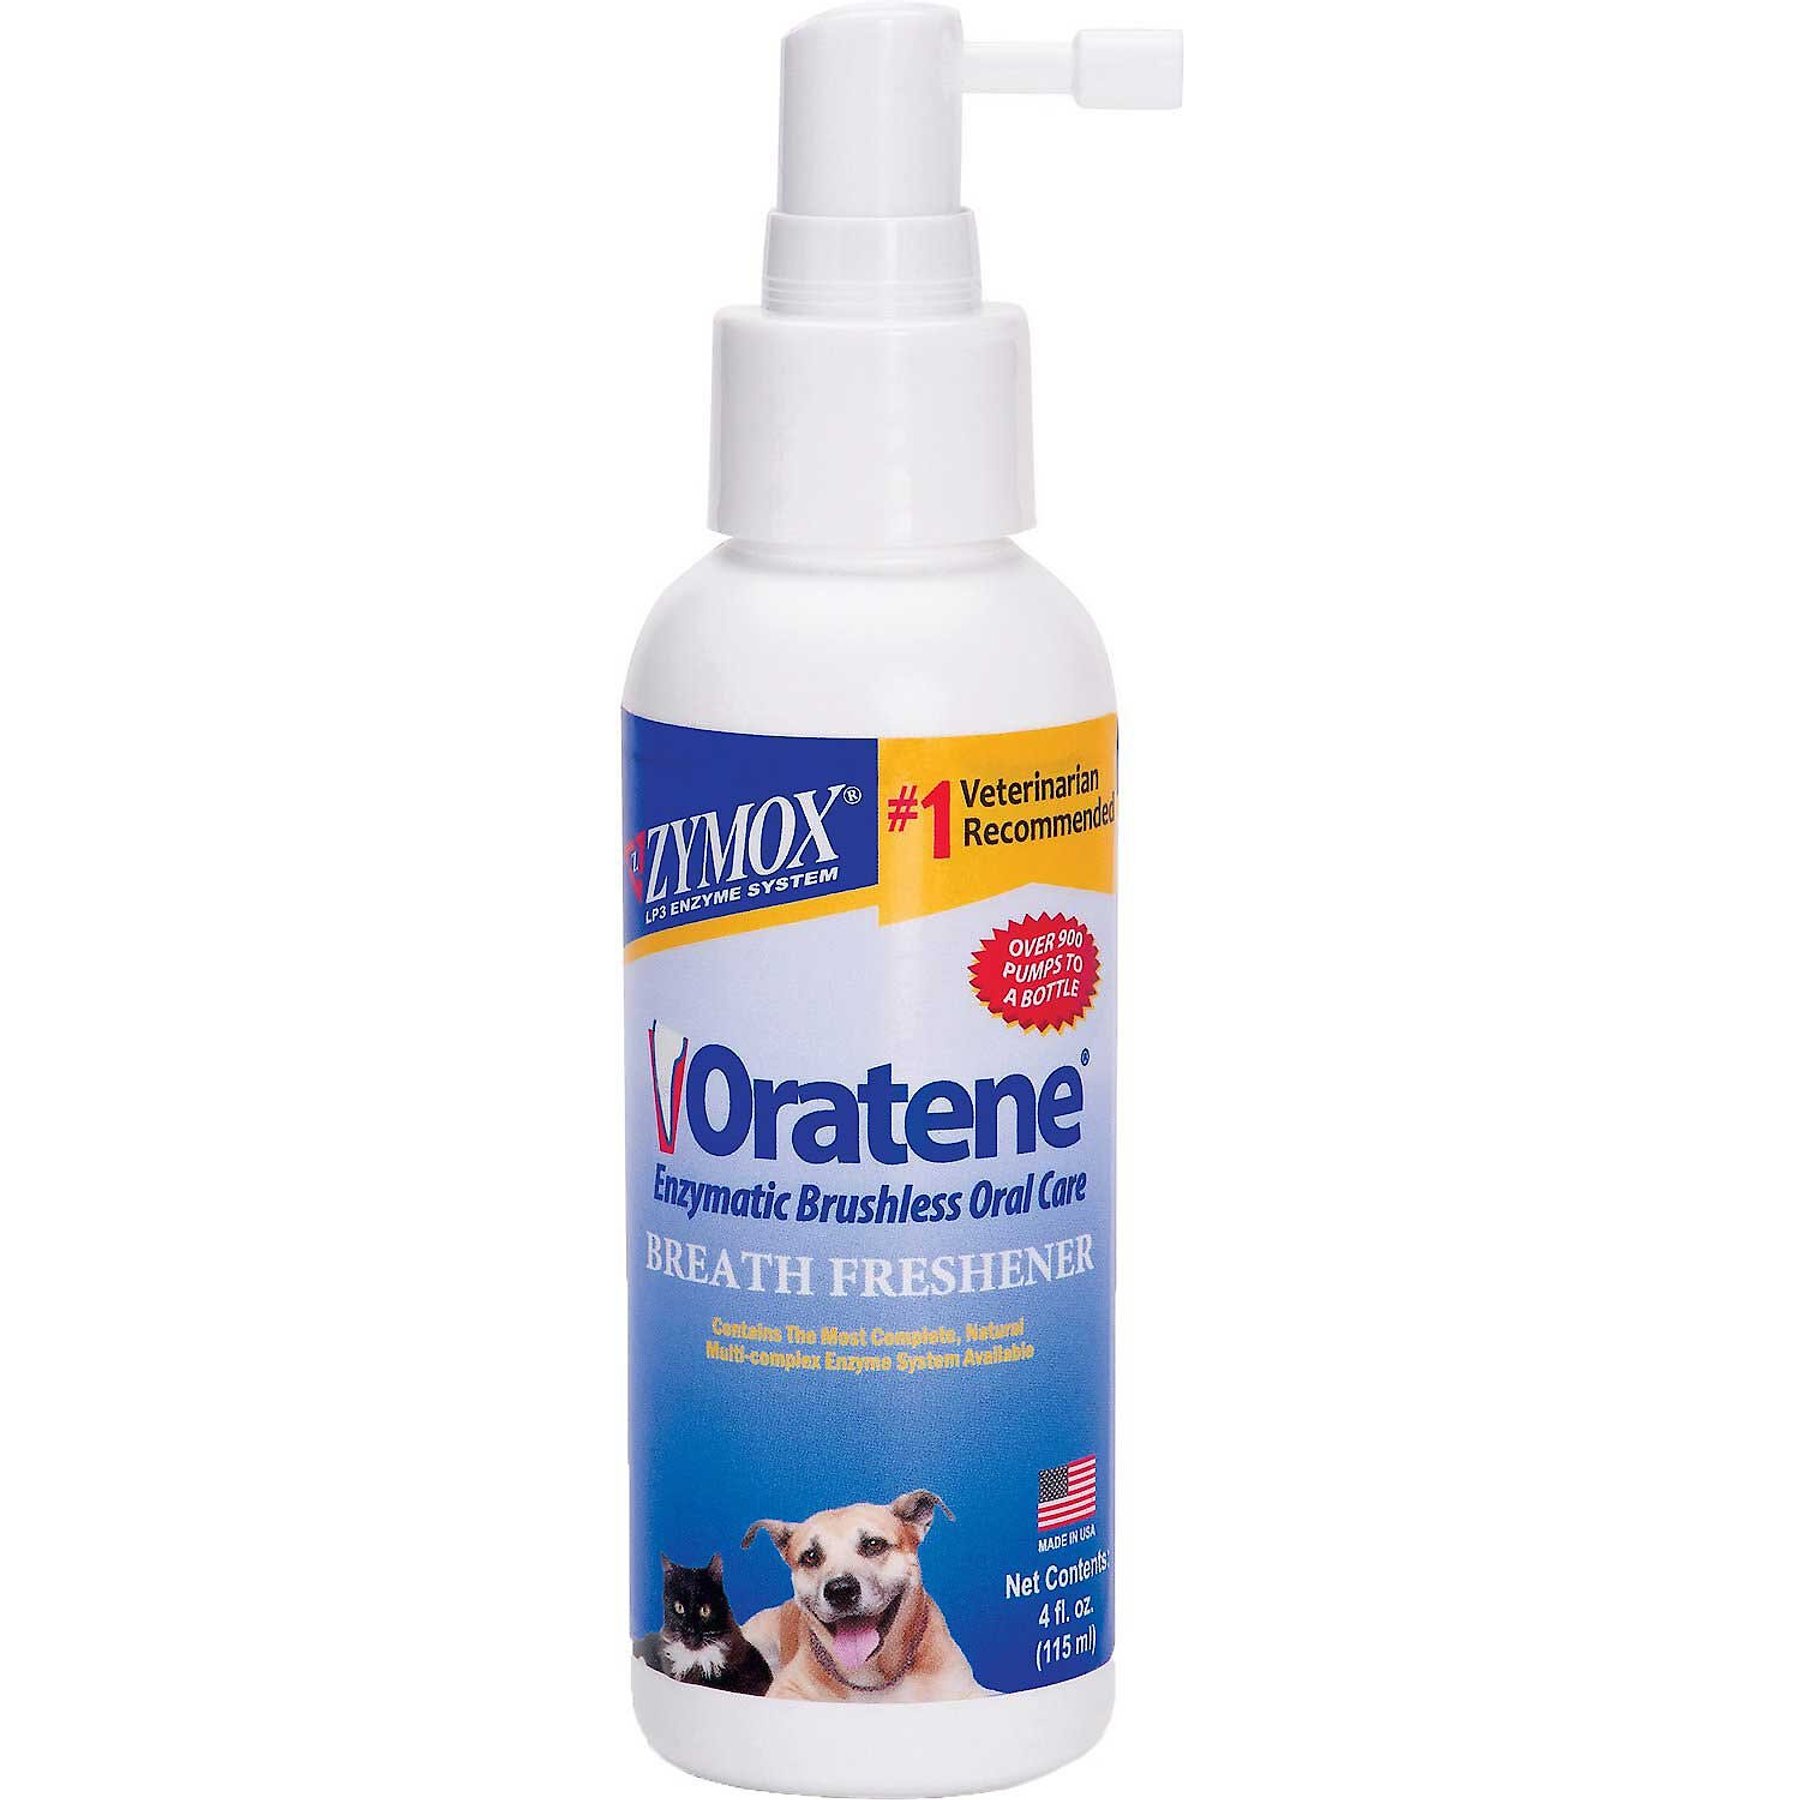 Oral Care Breath Freshener for Dogs & Cats, 4-oz Bottle